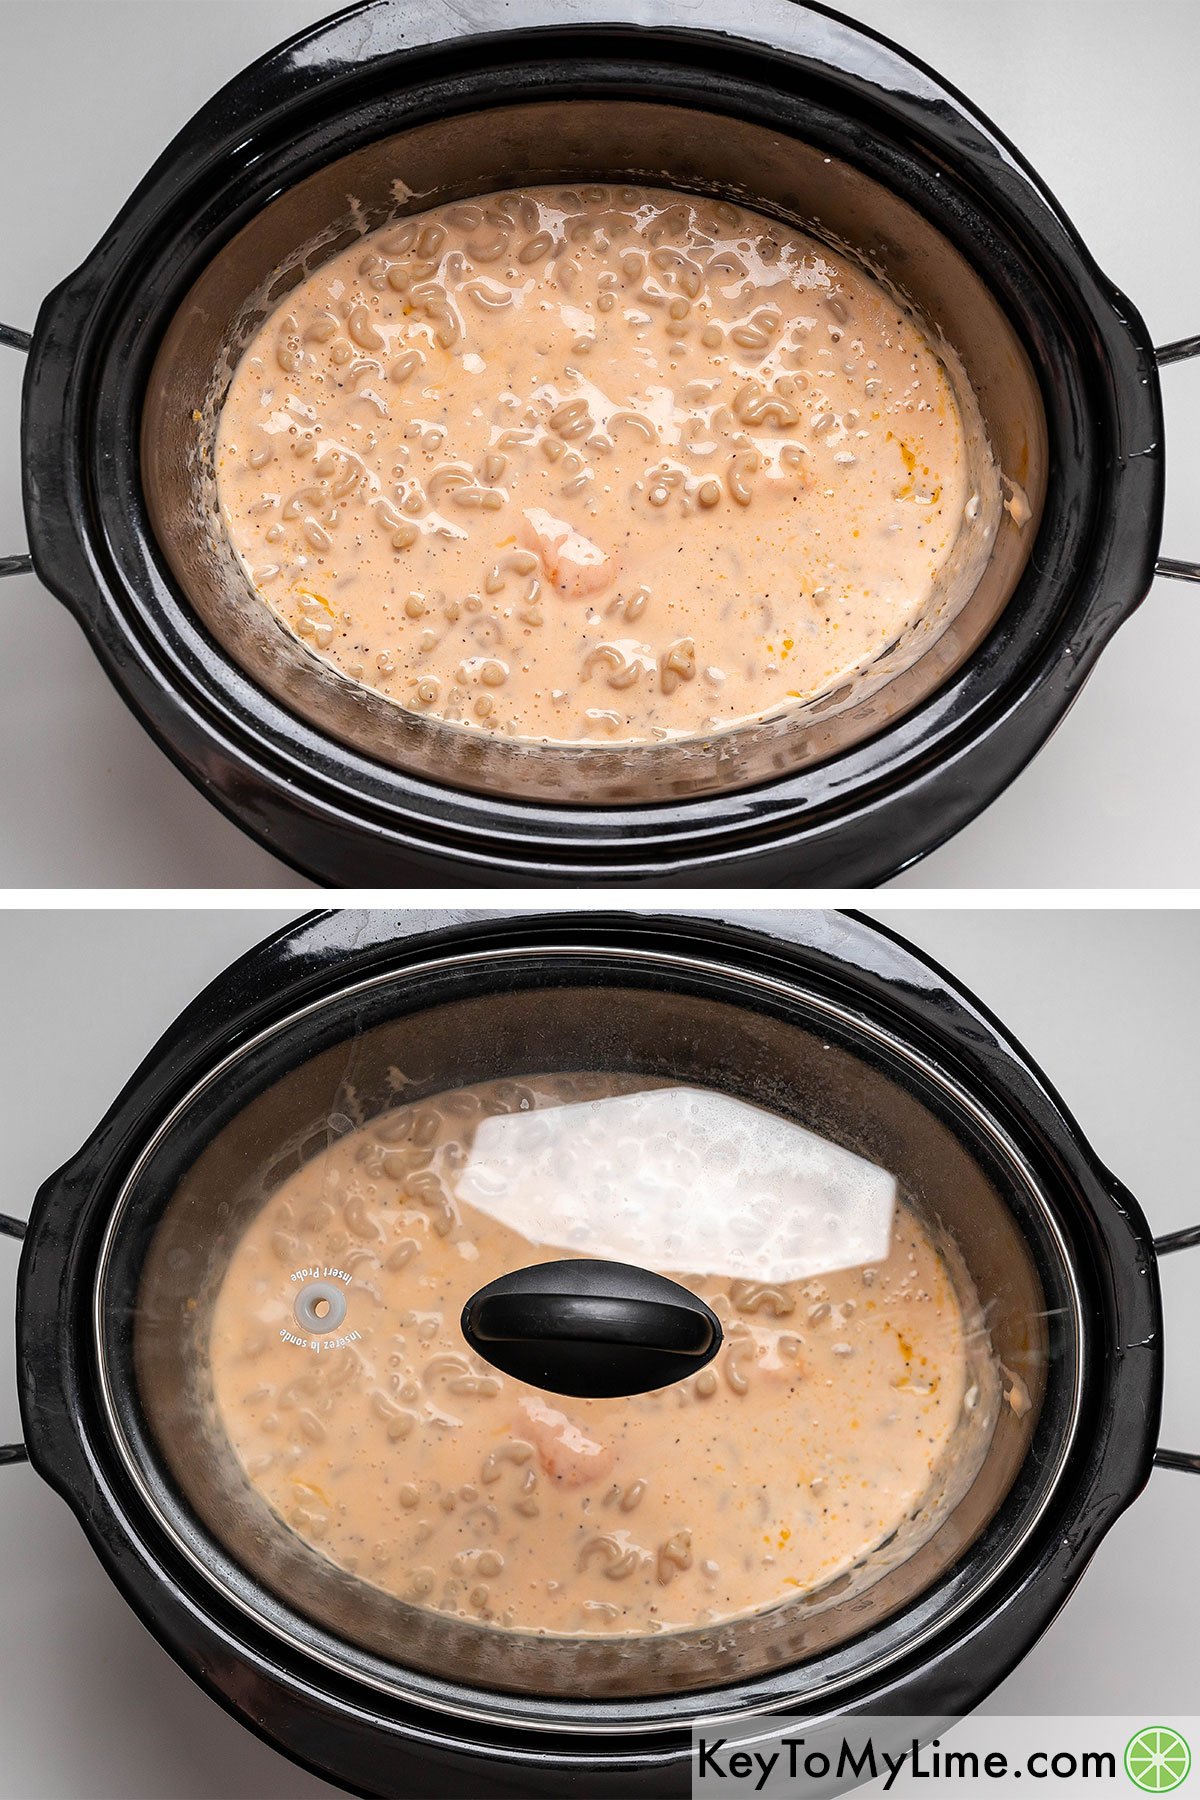 Mixing the noodles into the cheese sauce and then covering the crockpot with a fitted lid.